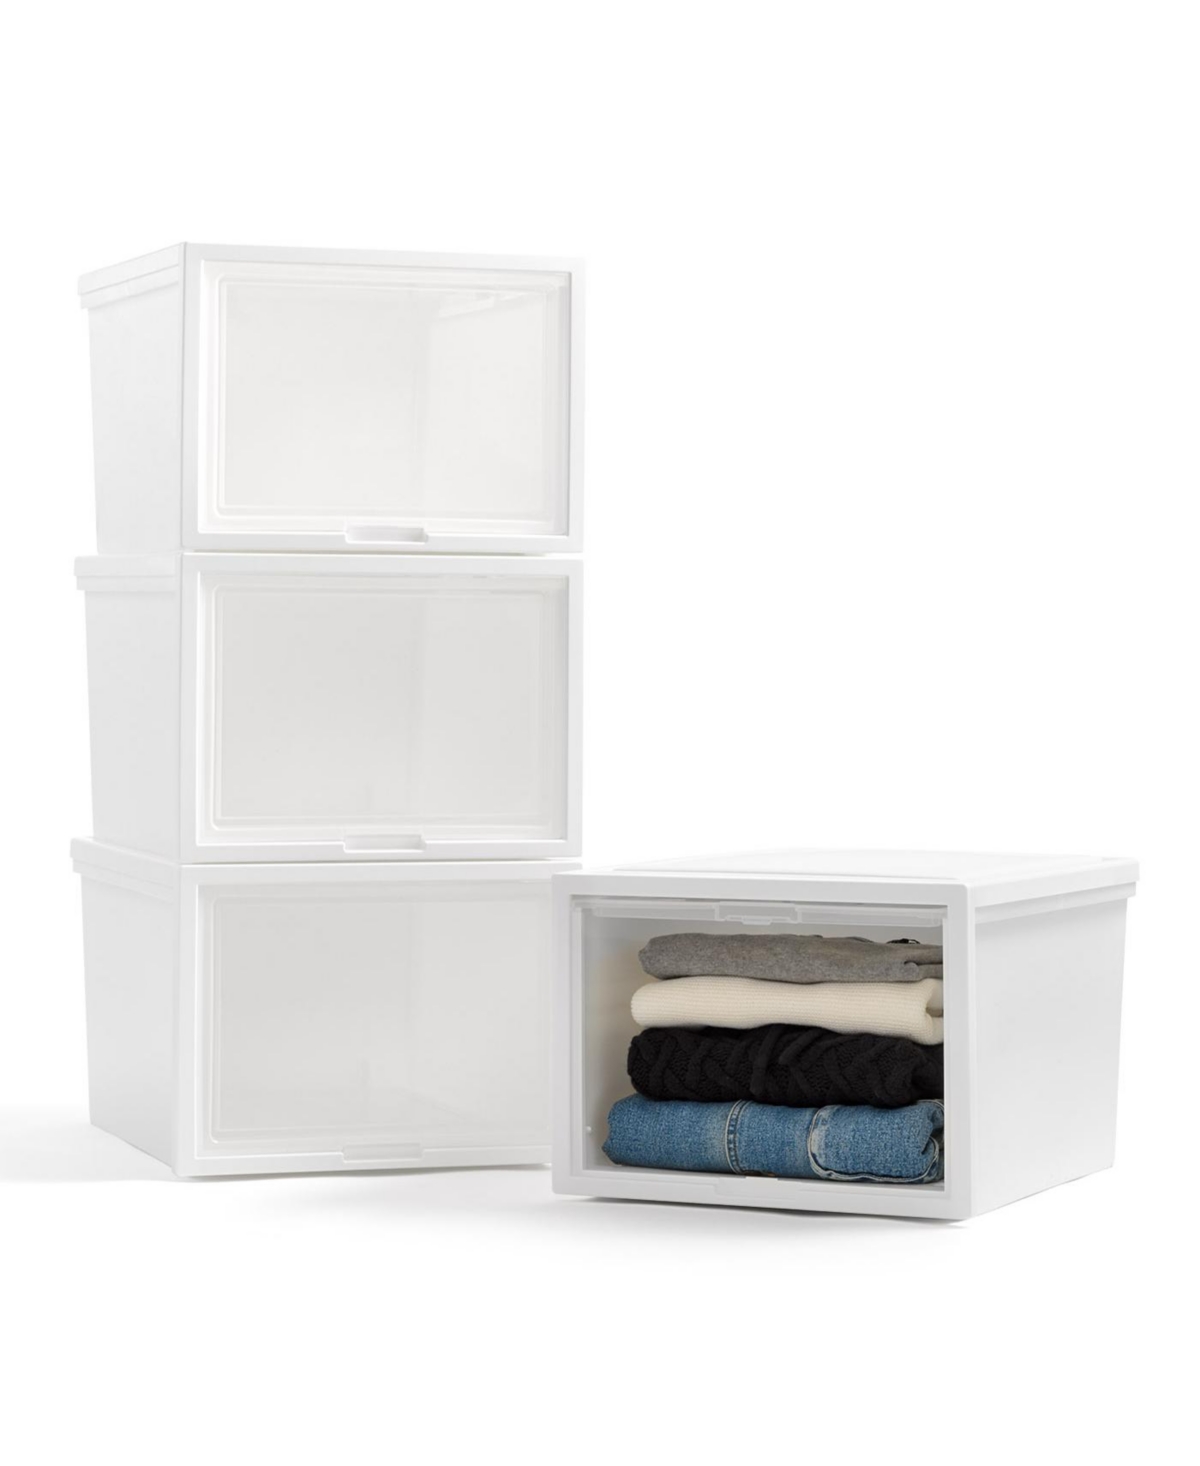 42 Qt. Stackable Storage System for Clothes, Large, 4 Pack, Plastic Dresser Chest with Flip-Up Door, Great for Closet, Home, Office, Bedroom